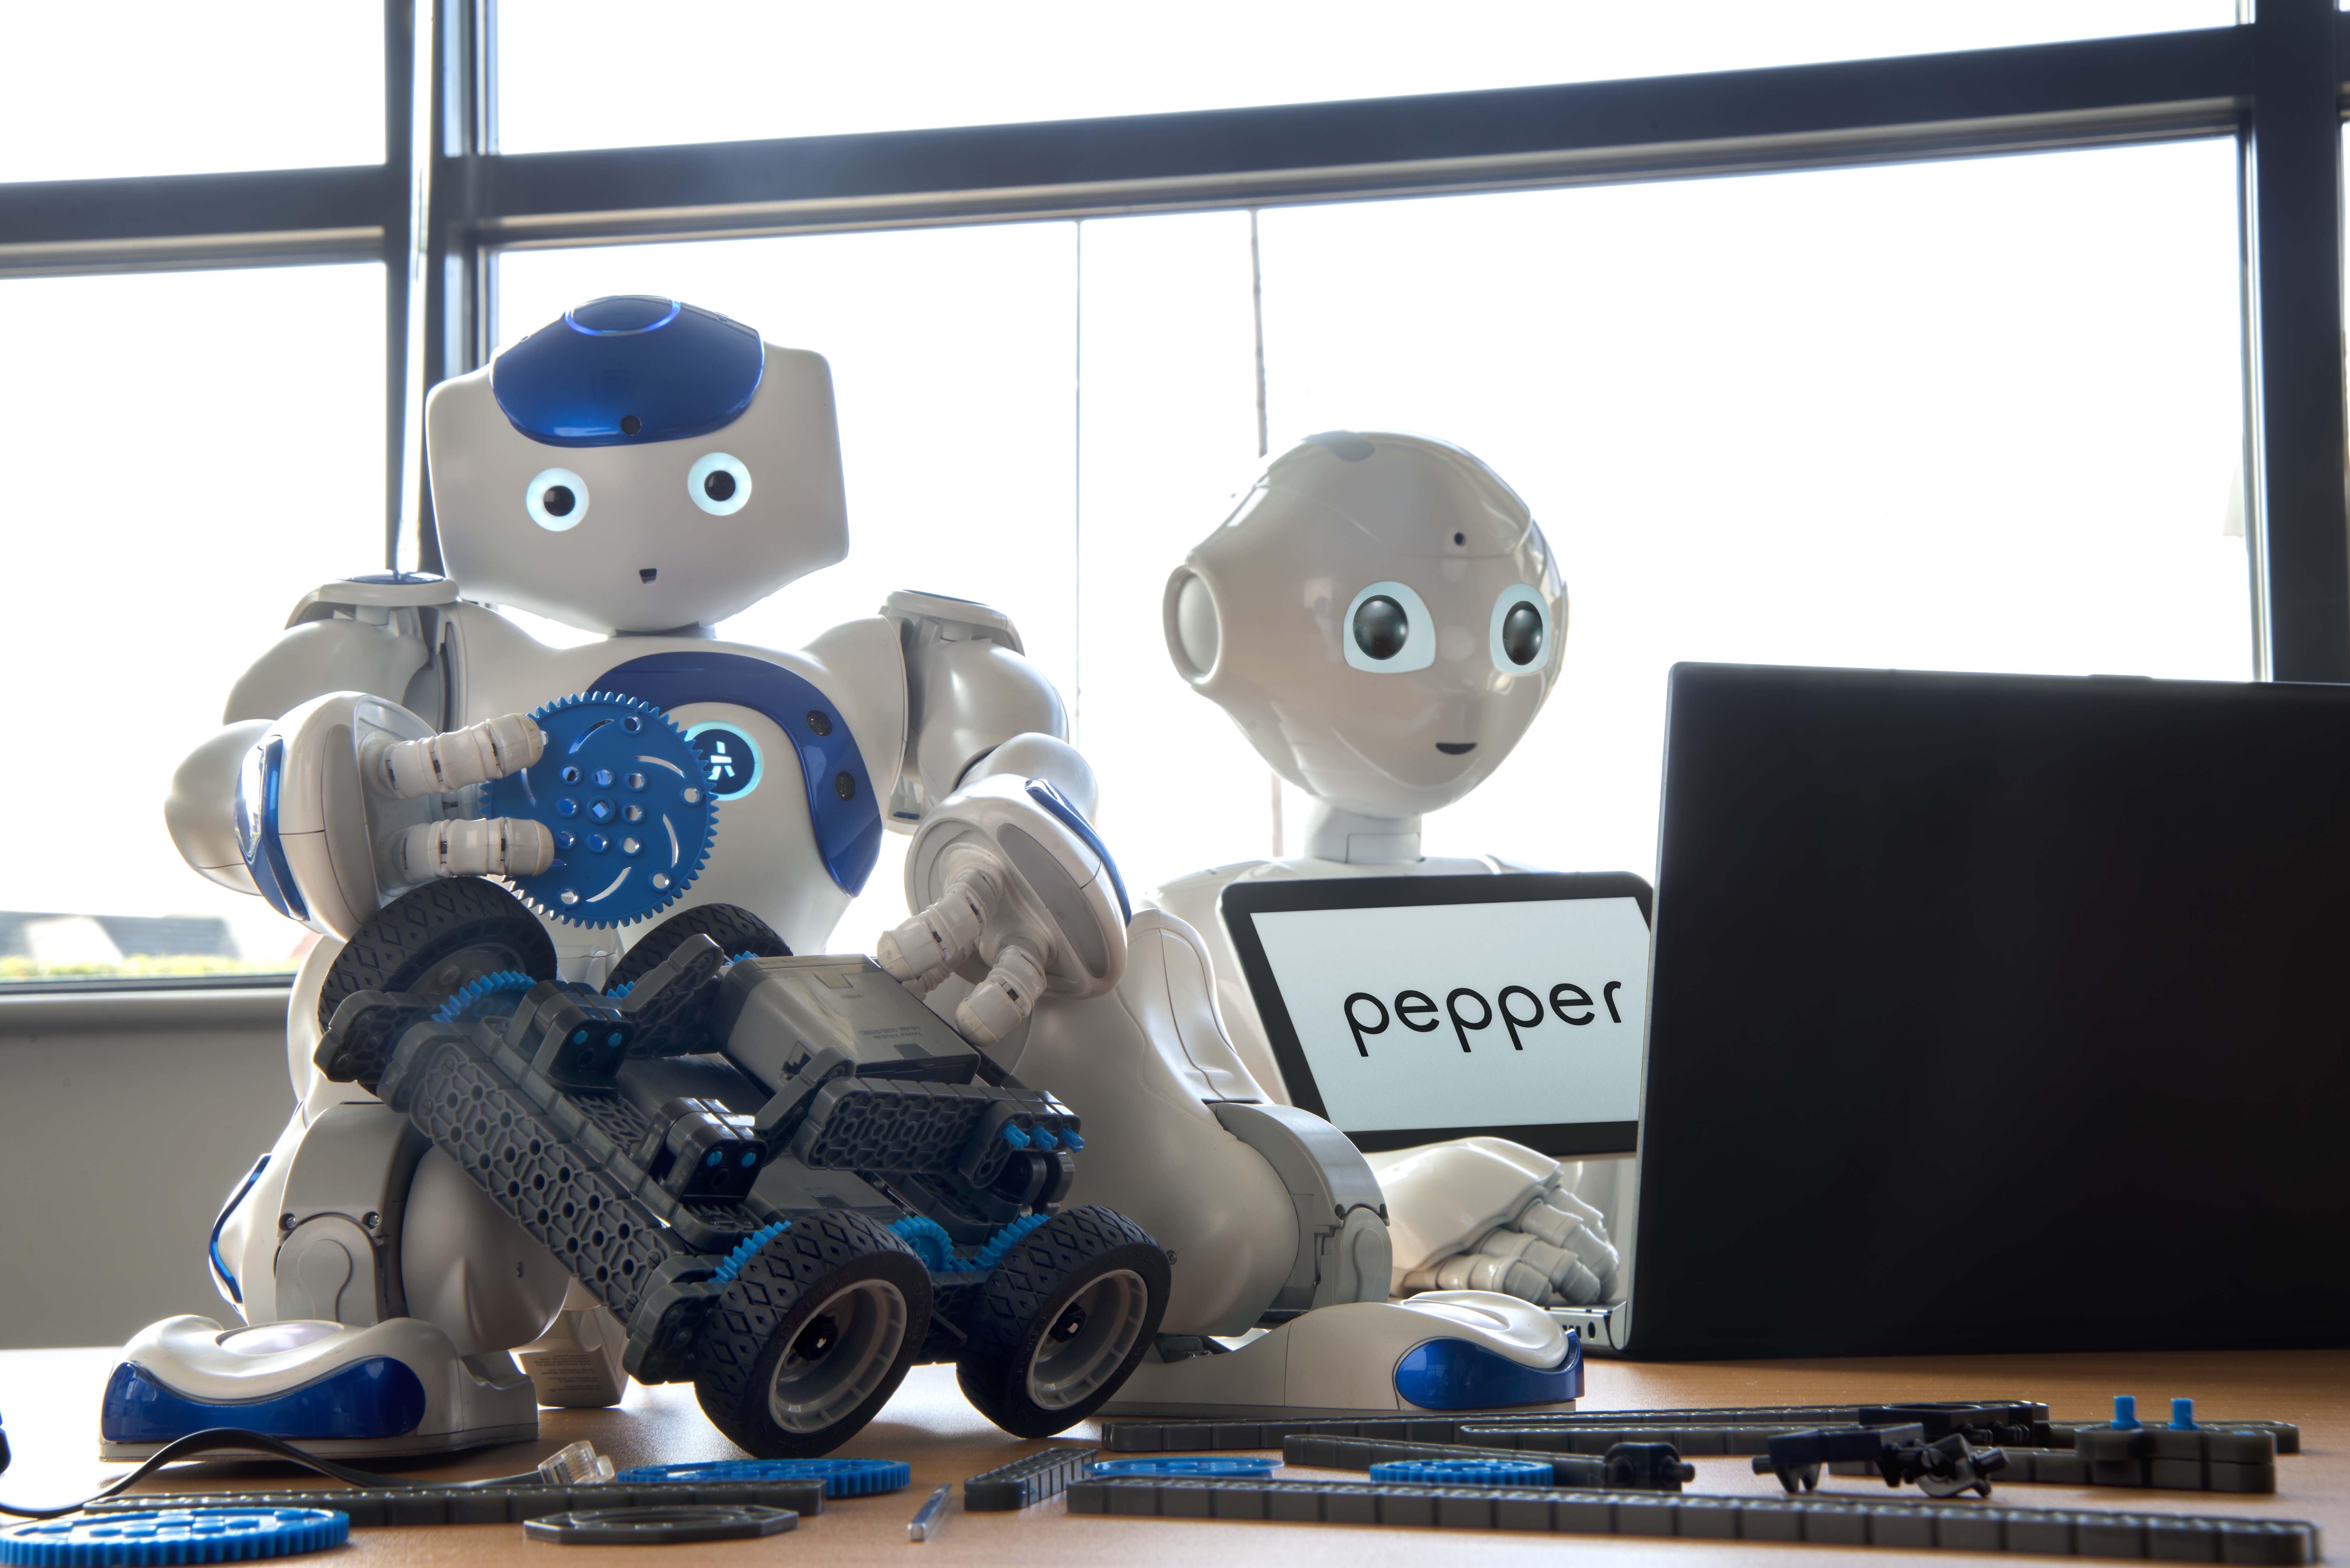 Pepper and NAO